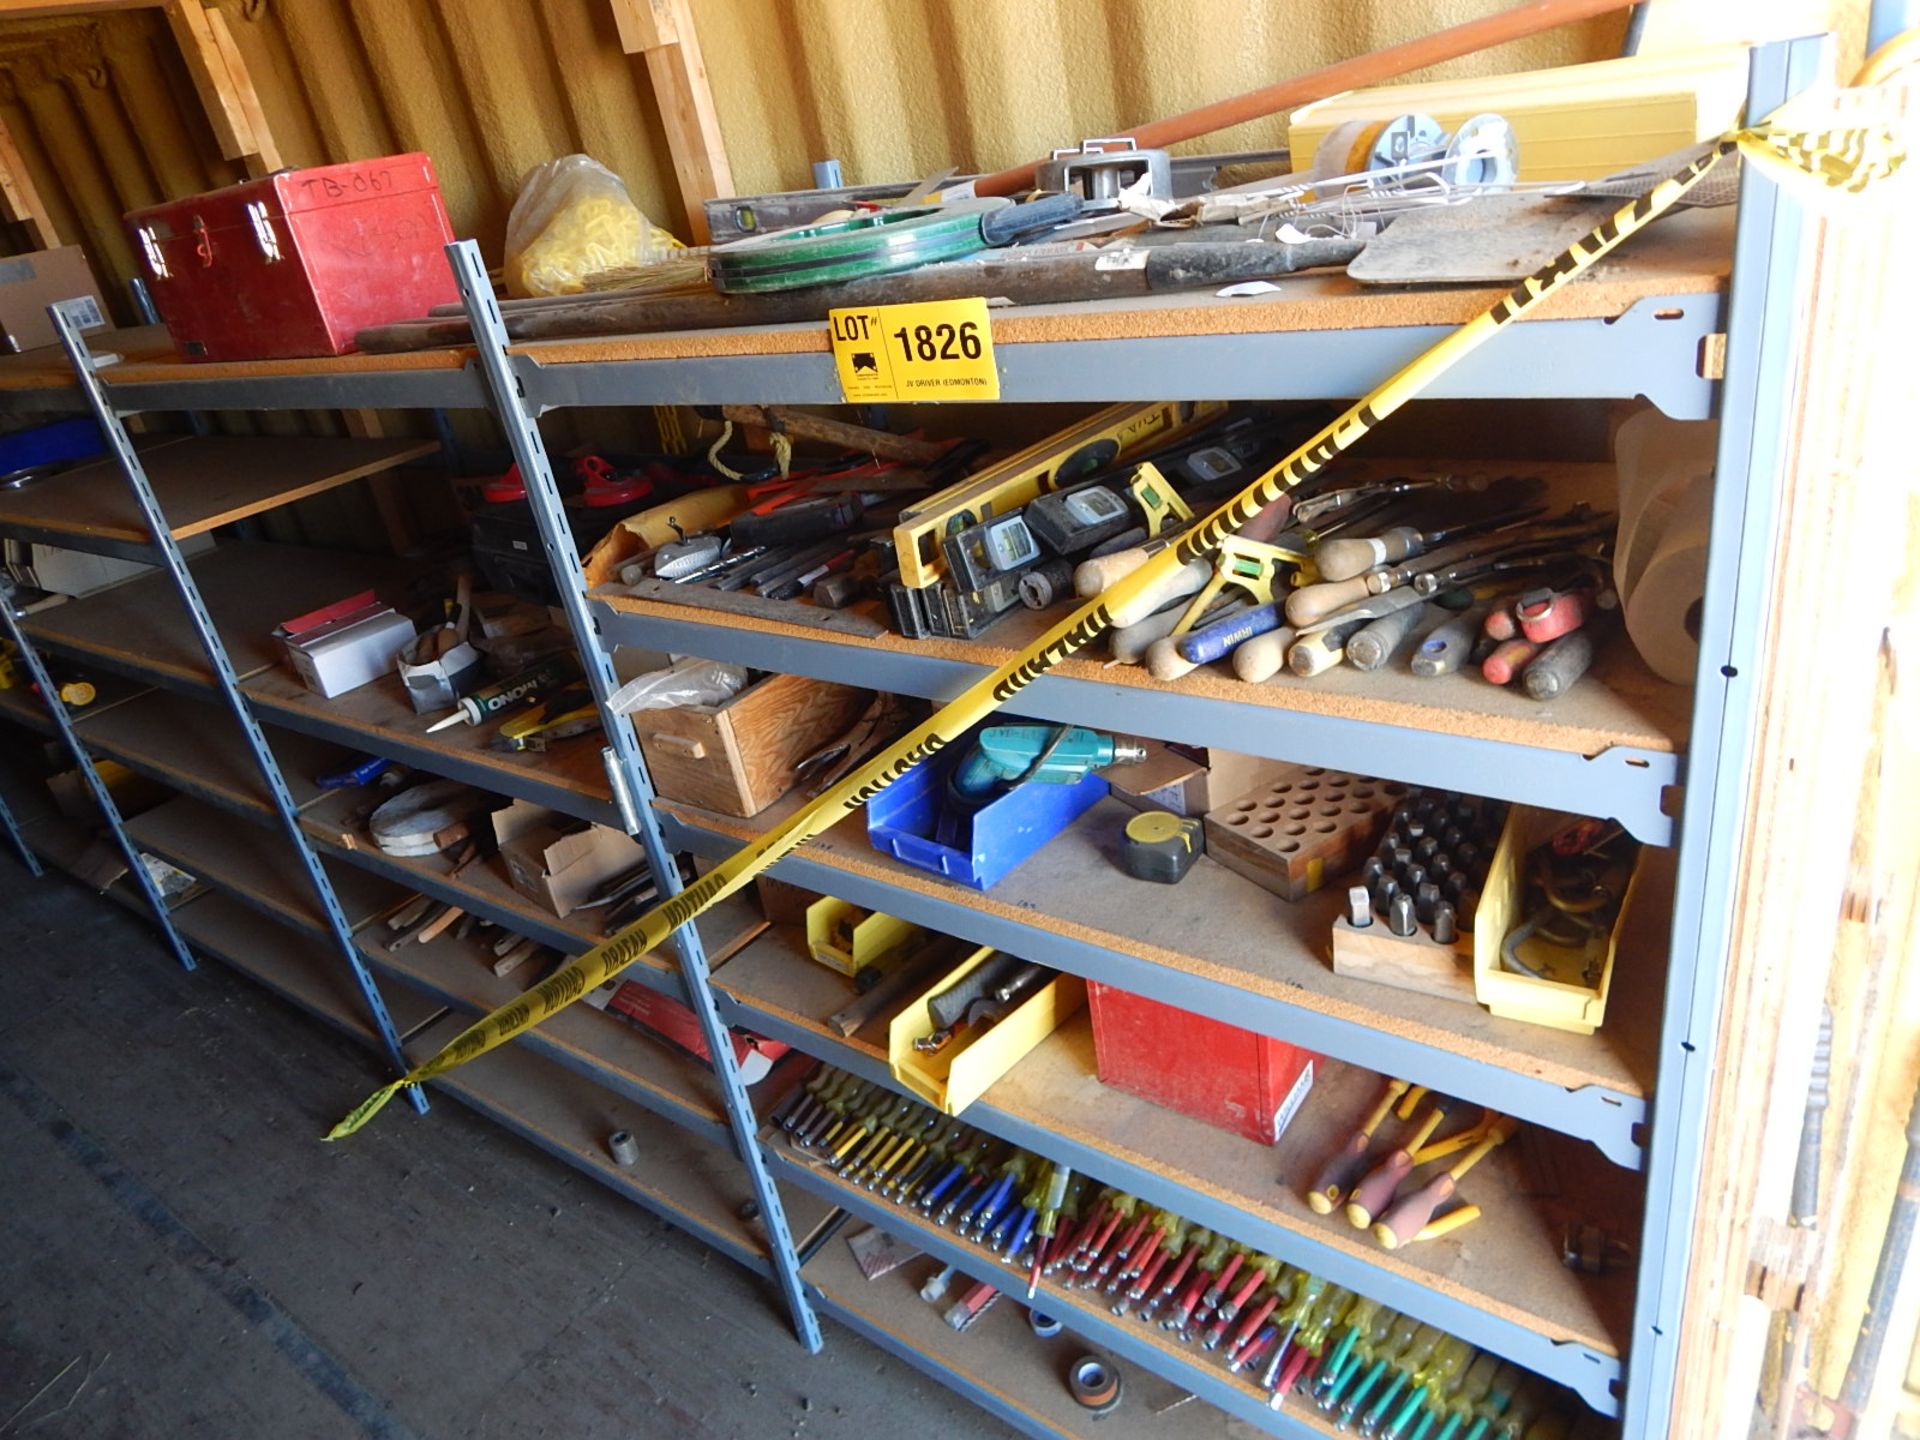 LOT/ CONTENTS OF (2) SECTIONS CONSISTING OF HAND TOOLS, PUNCHES, SCREWDRIVERS, AND WIRE ROPE (SC